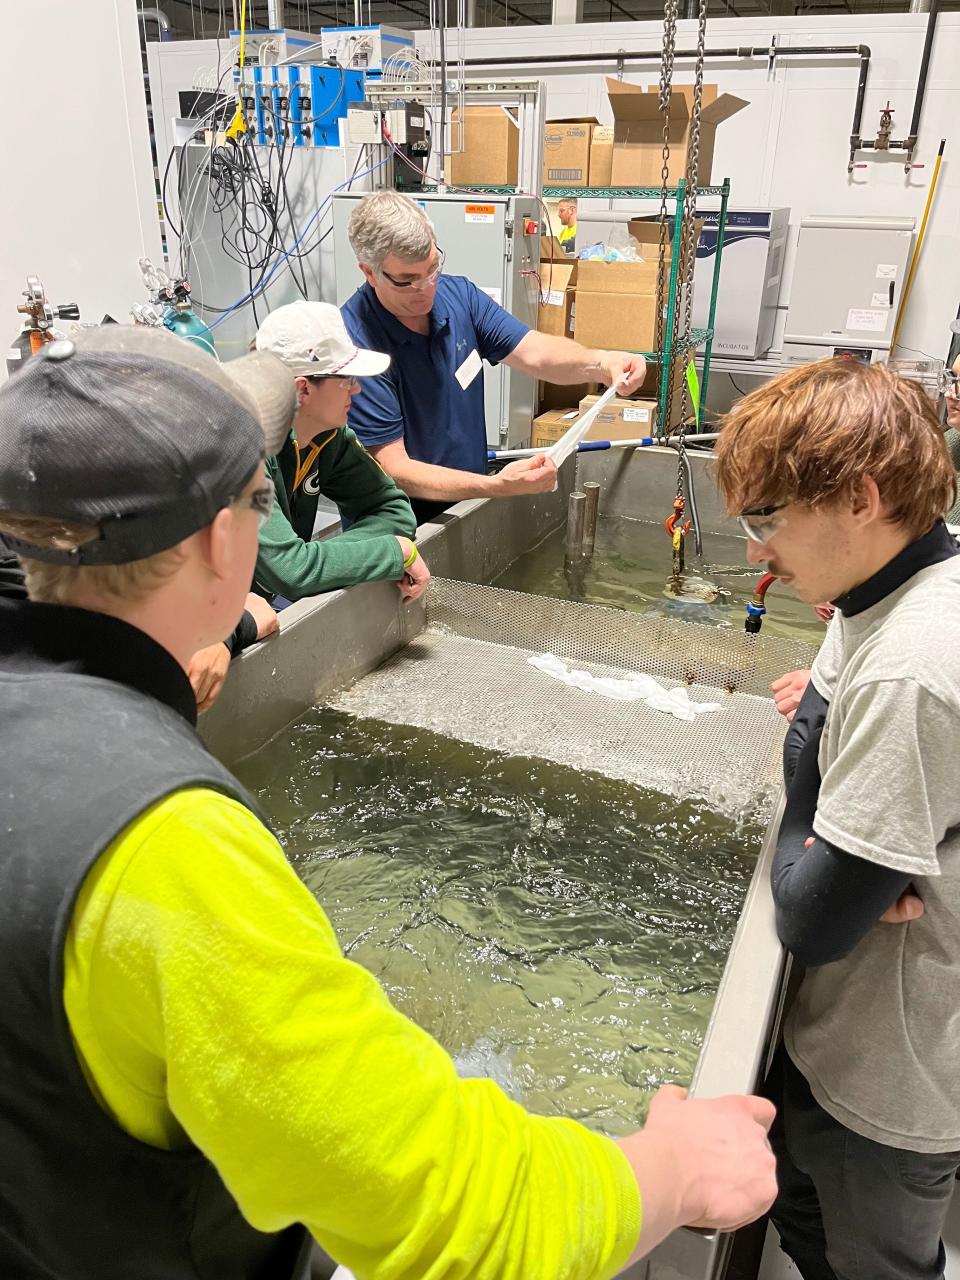 Pete Lortscher shows plumbing students from Fox Valley Technical College what a baby wipe looks like after going through a pump at Kimberly-Clark's Flushability Lab in Neenah, Wisc., on Jan. 25.